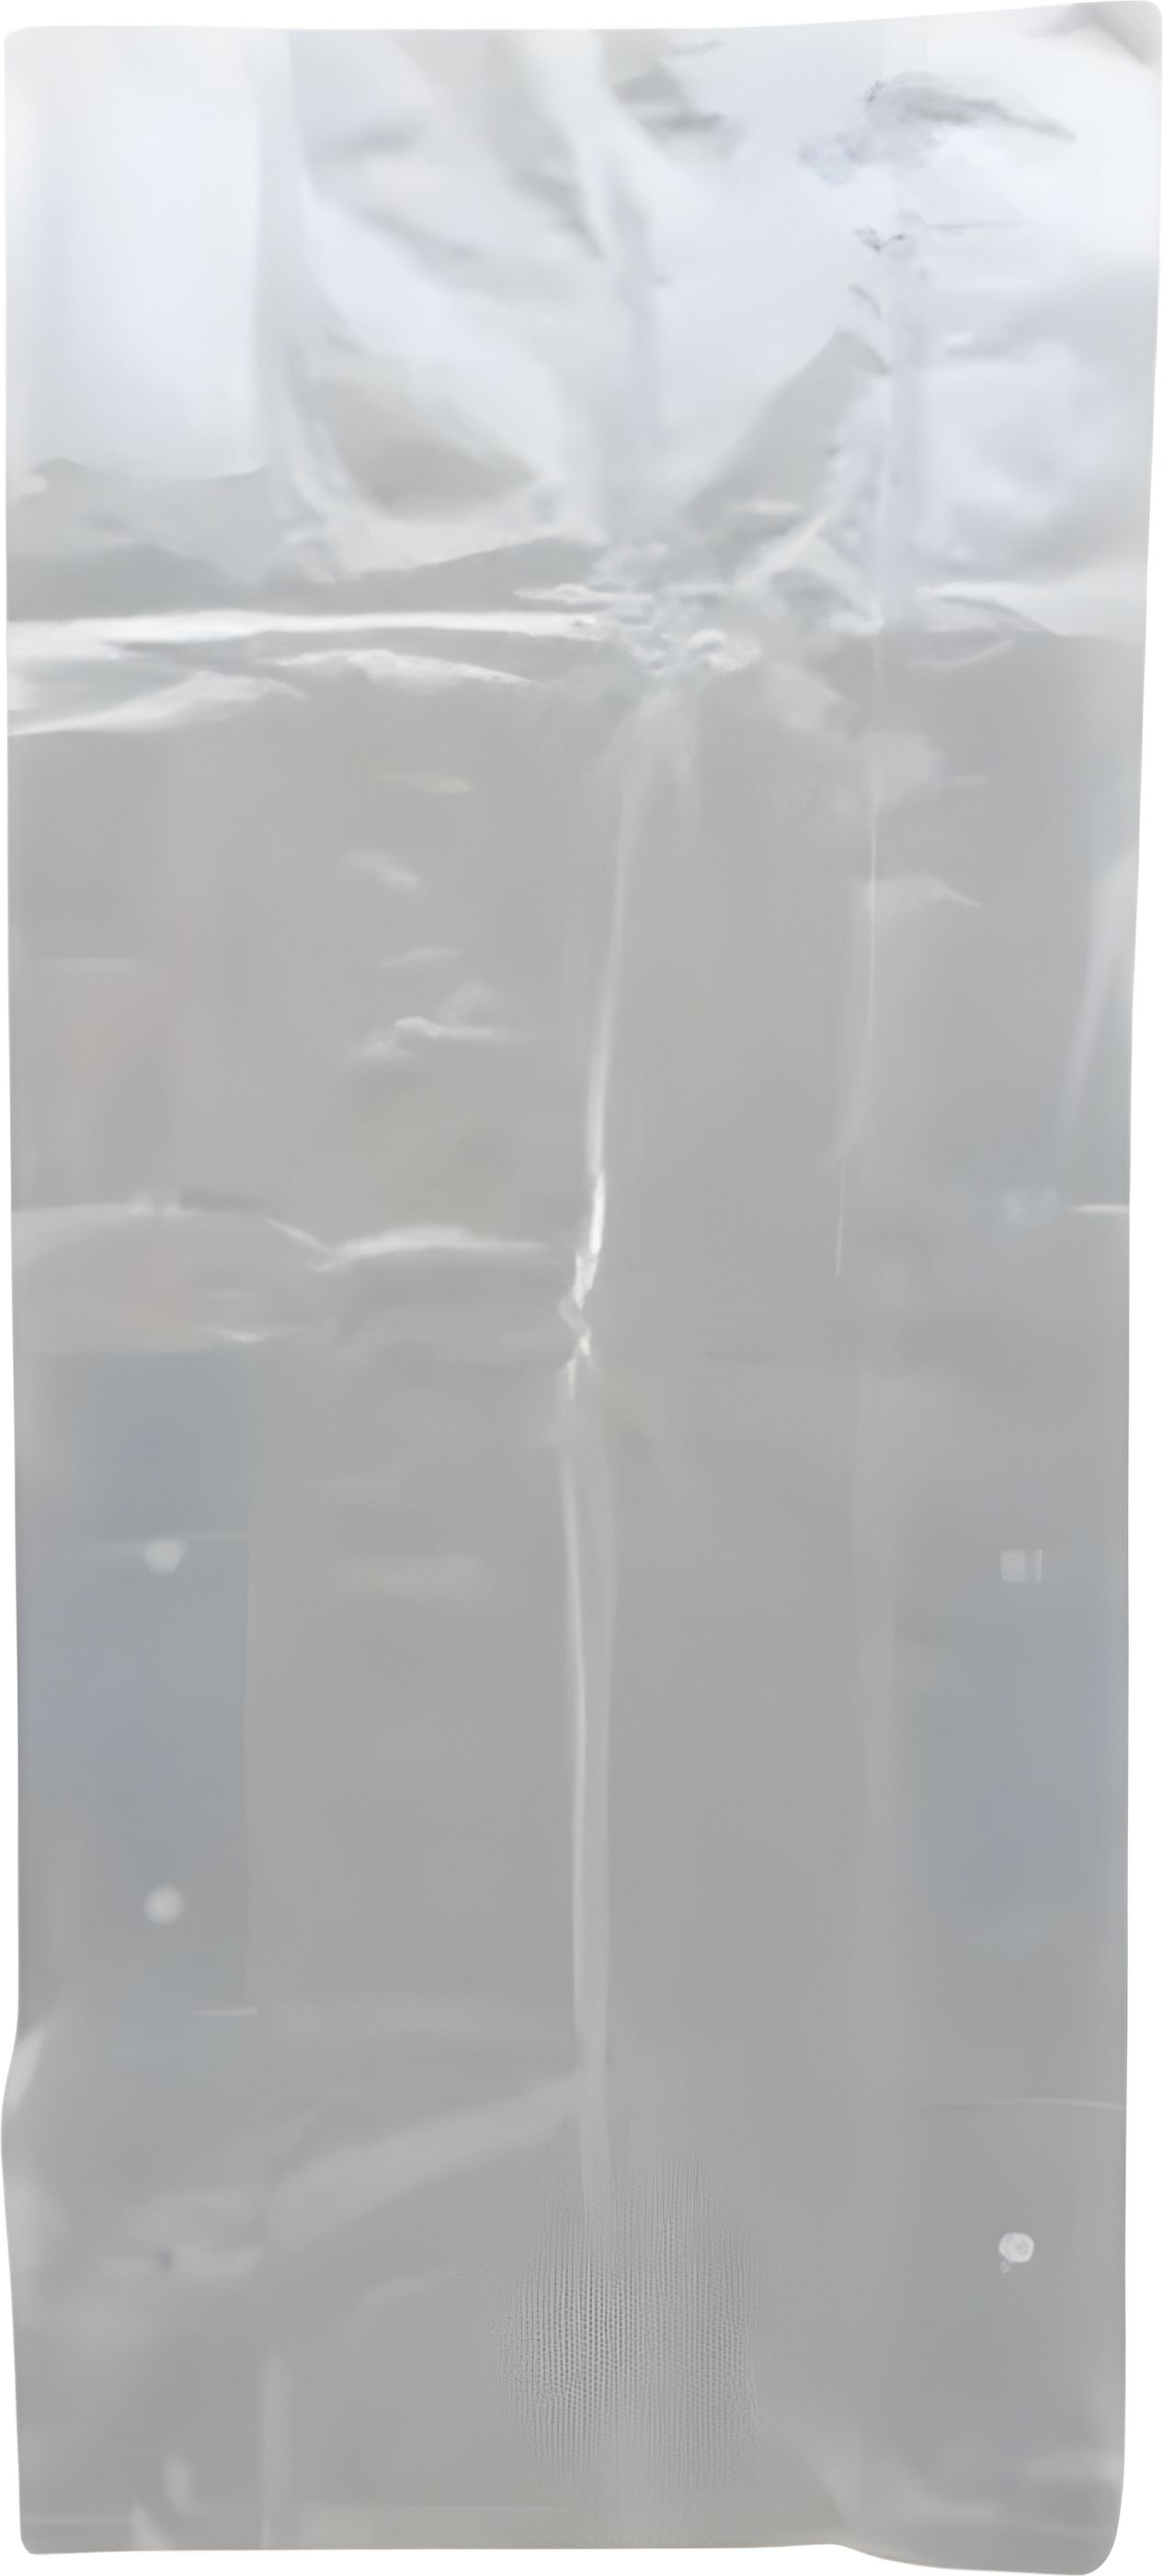 Alte-Rego - 10 Ib Clear Vented Polybag with Holes - 3527900